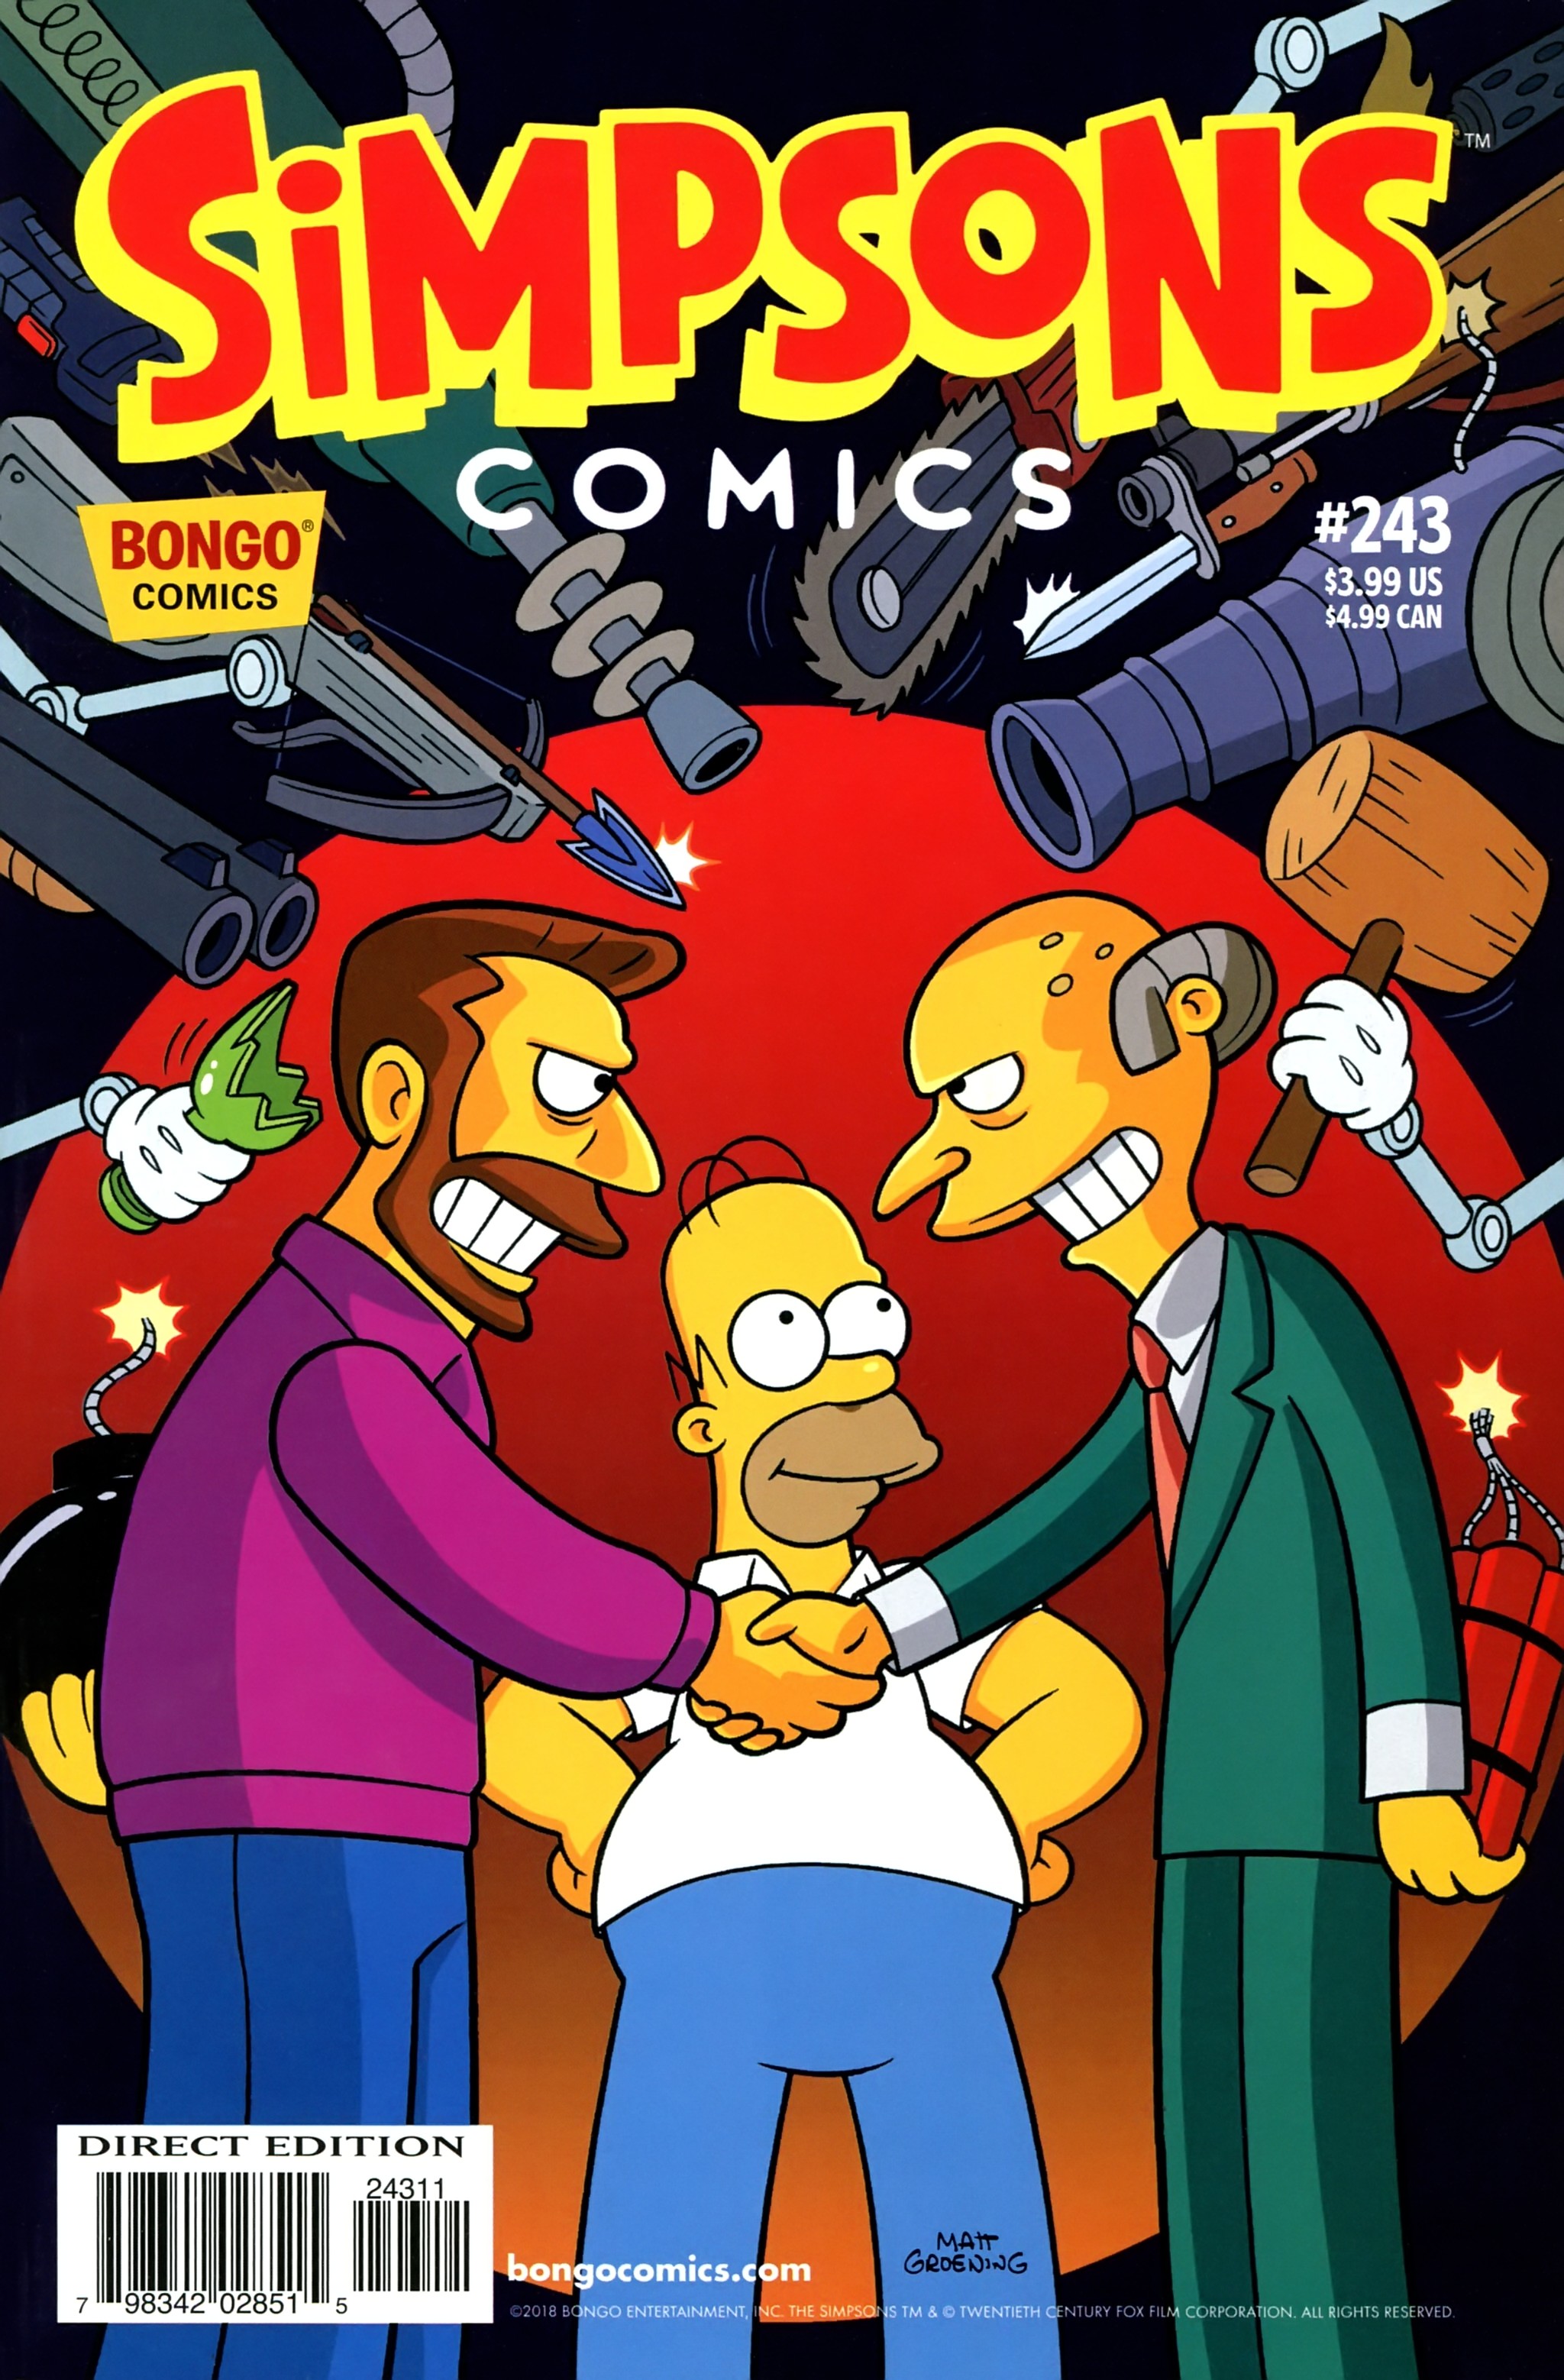 Simpsons Comics (1993-): Chapter 243 - Page 1